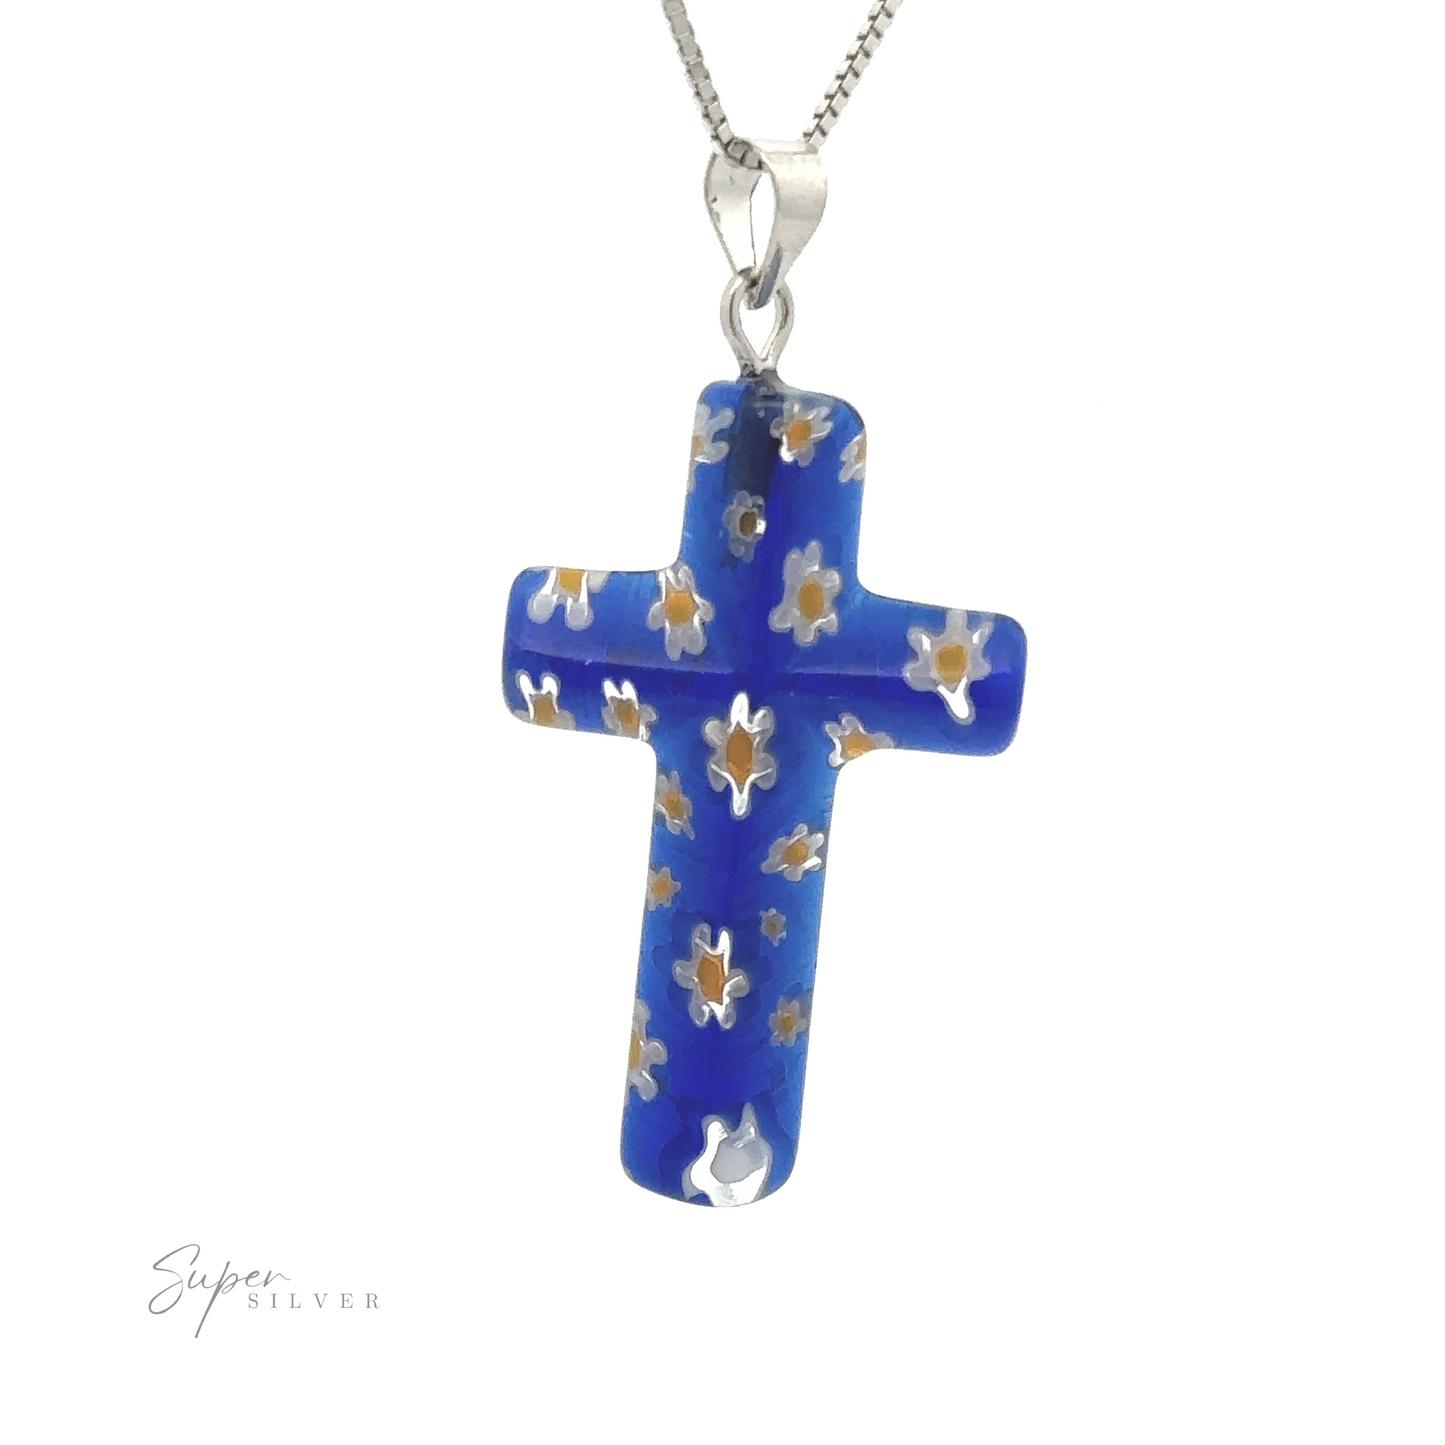 
                  
                    A Cross Pendant with Flower Pattern hangs from a silver chain necklace. The brand name "Super Silver" is visible in the bottom left corner, highlighting its quality craftsmanship.
                  
                